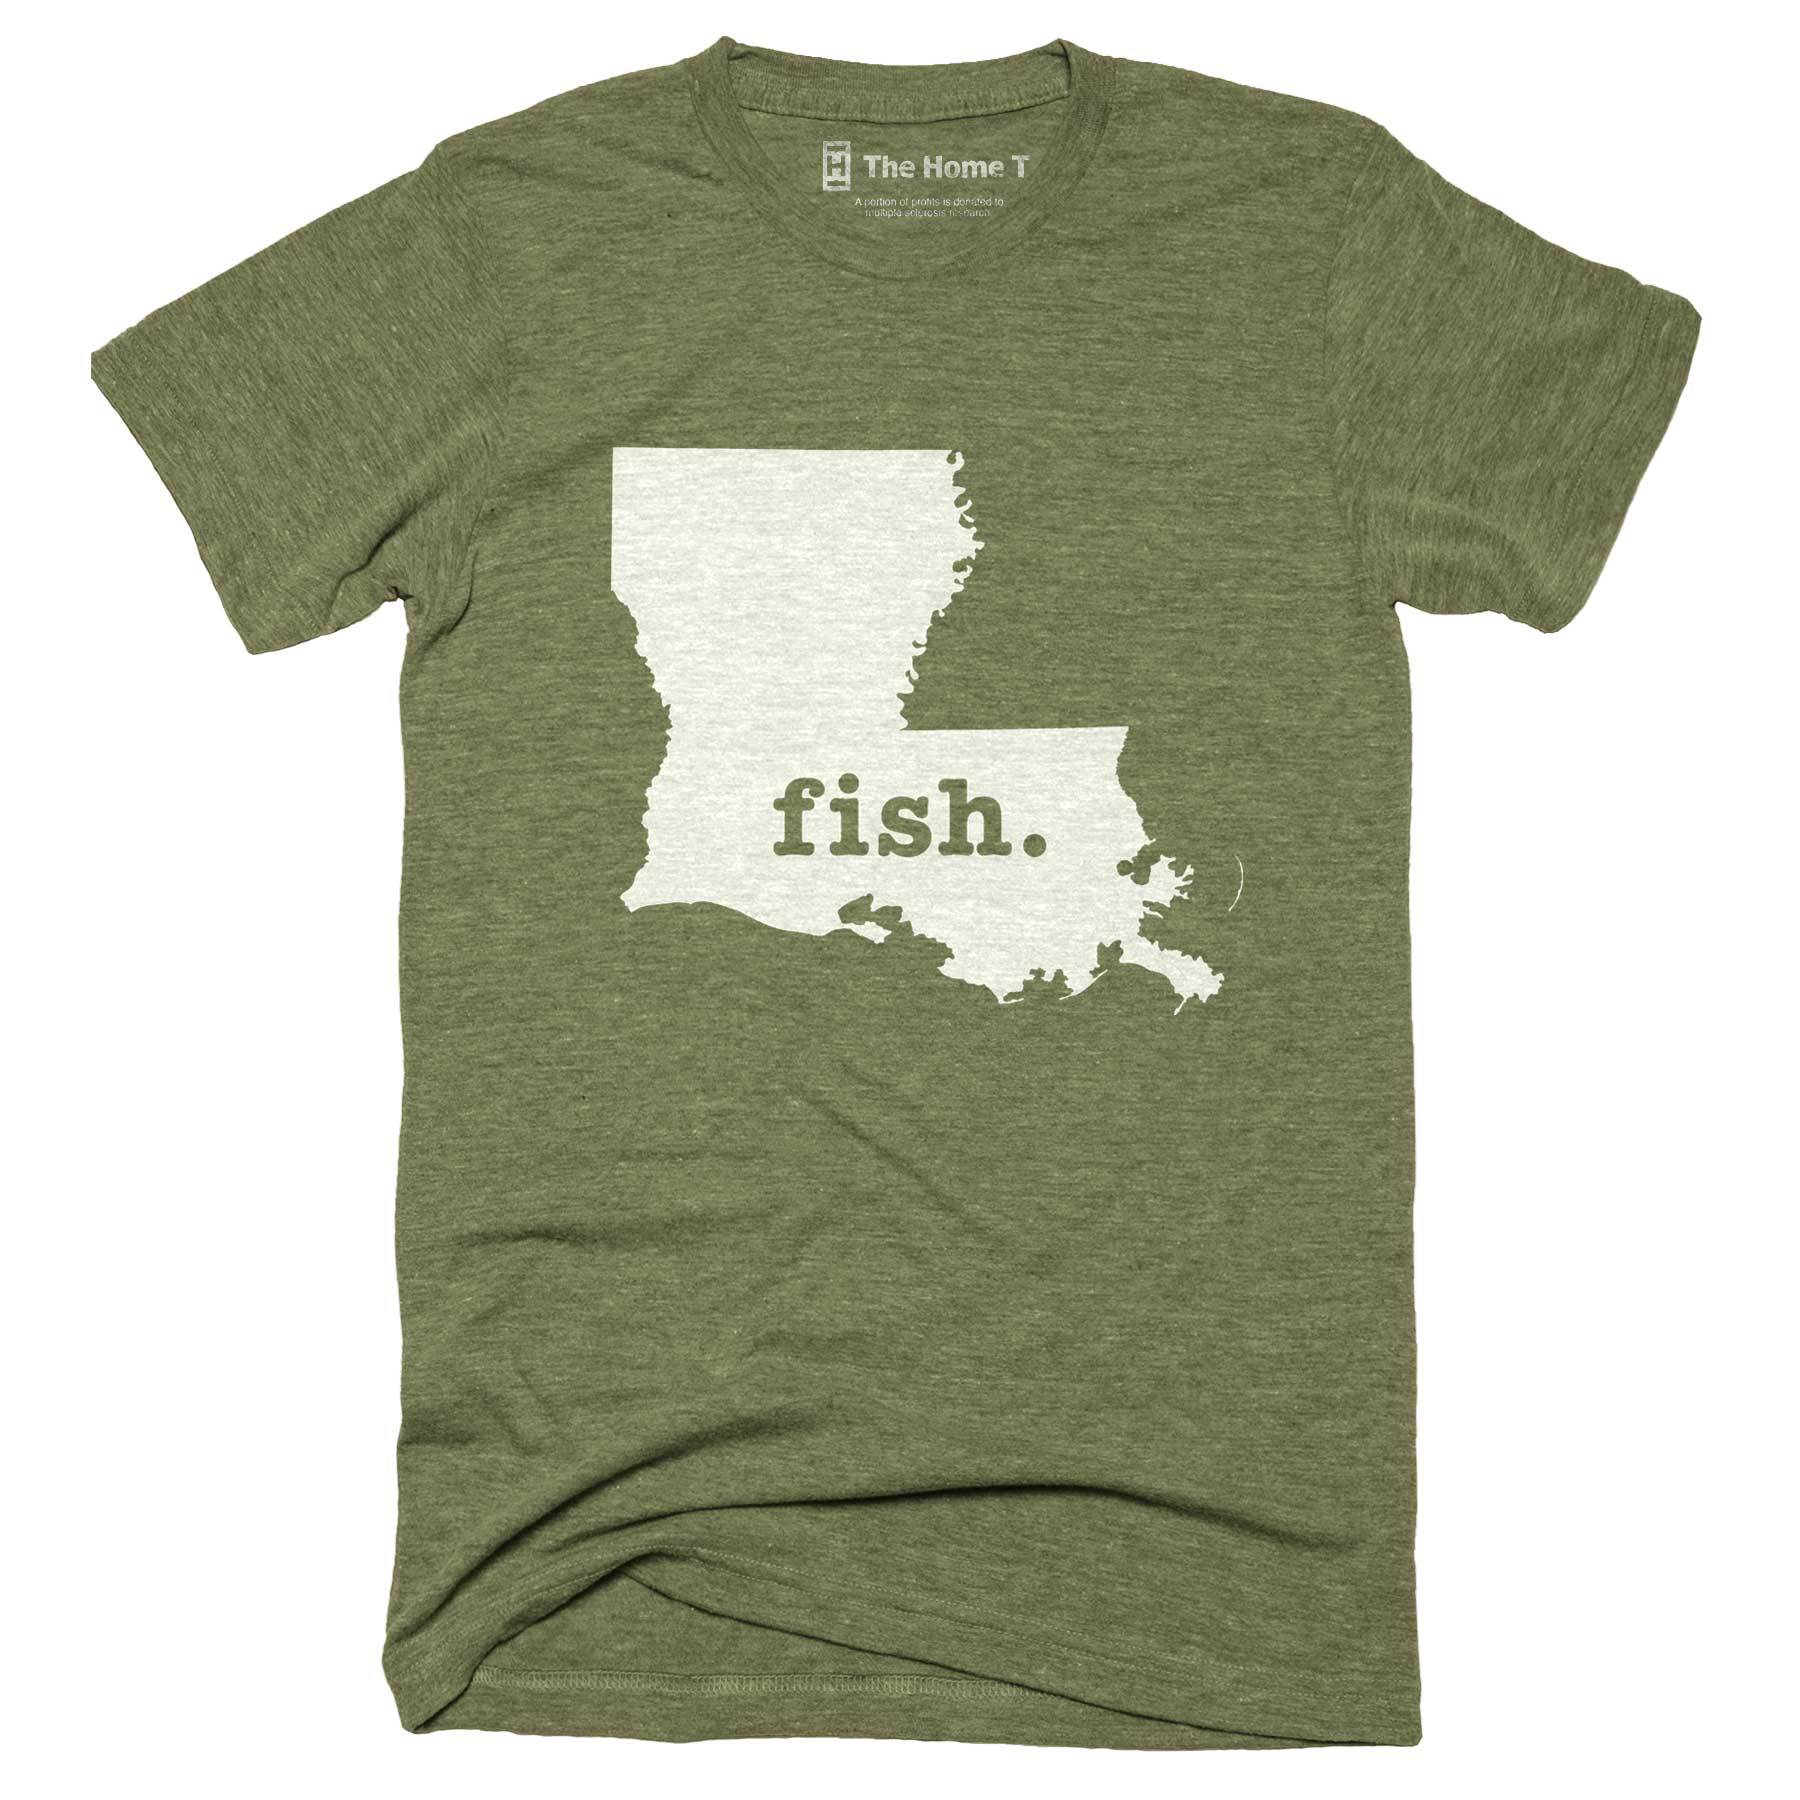 Louisiana Fish Home T-Shirt Outdoor Collection The Home T XXL Army Green